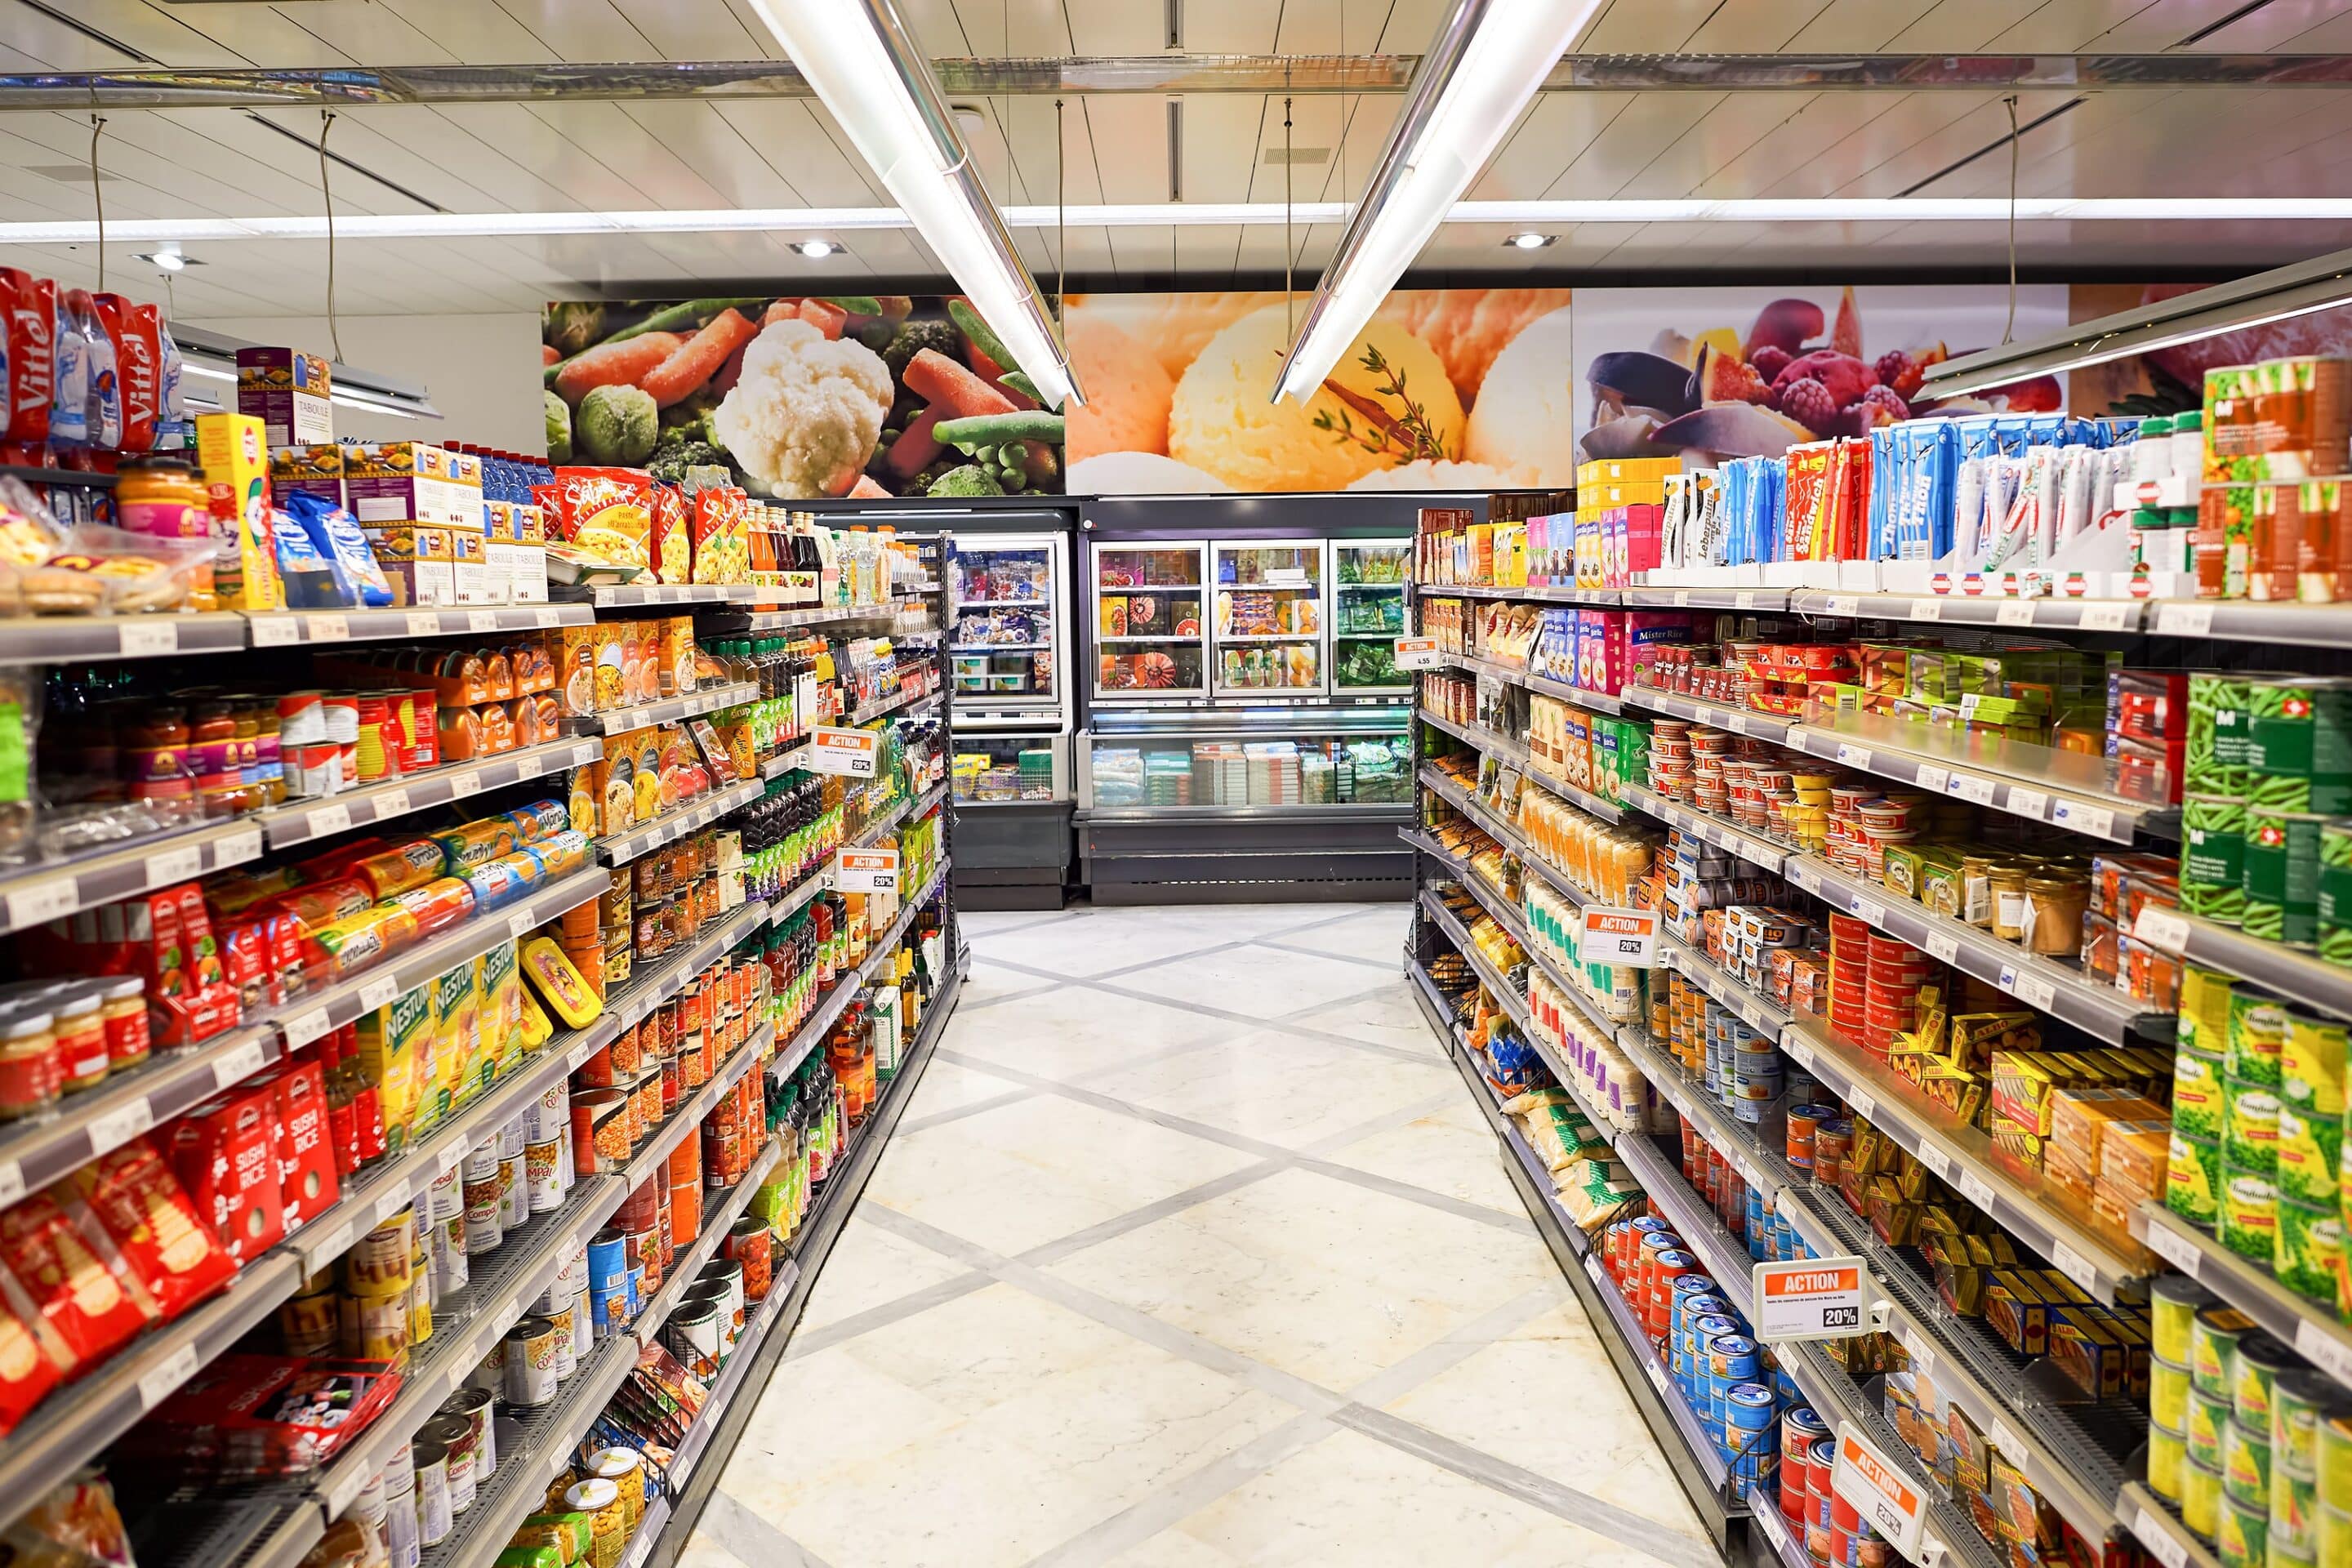 Grocery, Freezer and Dairy items reach shelves of independent retailers – DairyCentral and CJR get products into the hands of consumers